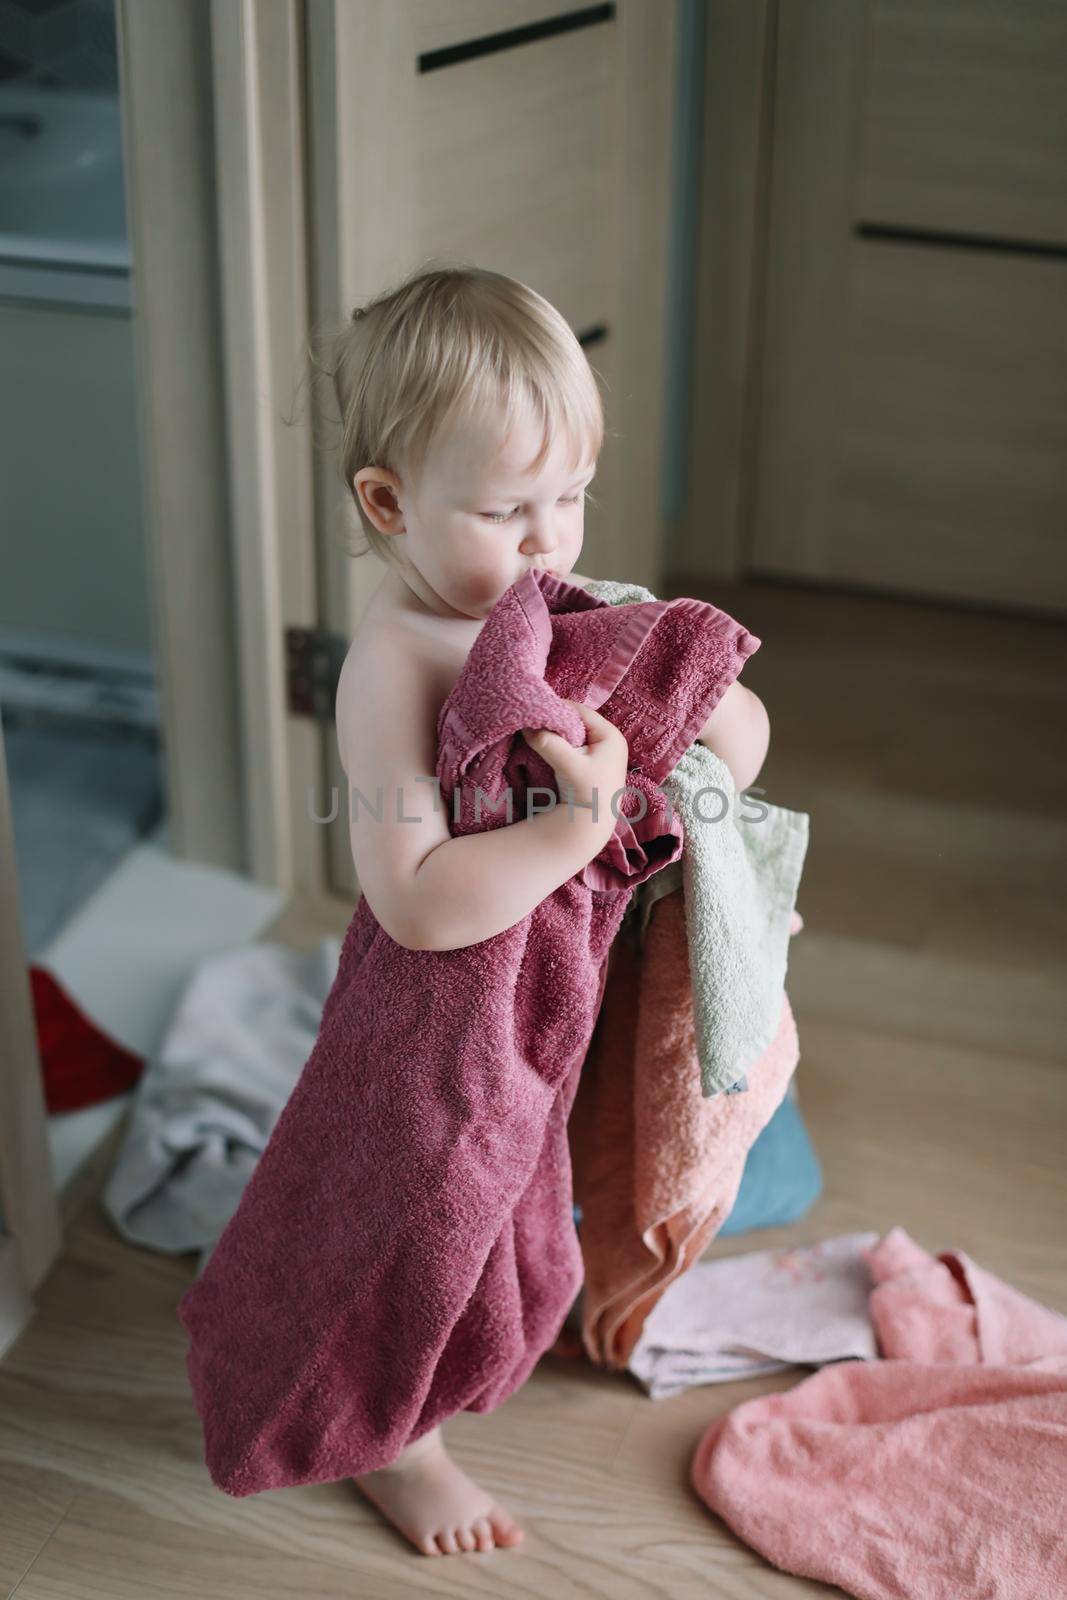 cute funny baby playing with stack of towels in the bathroom at home by paralisart